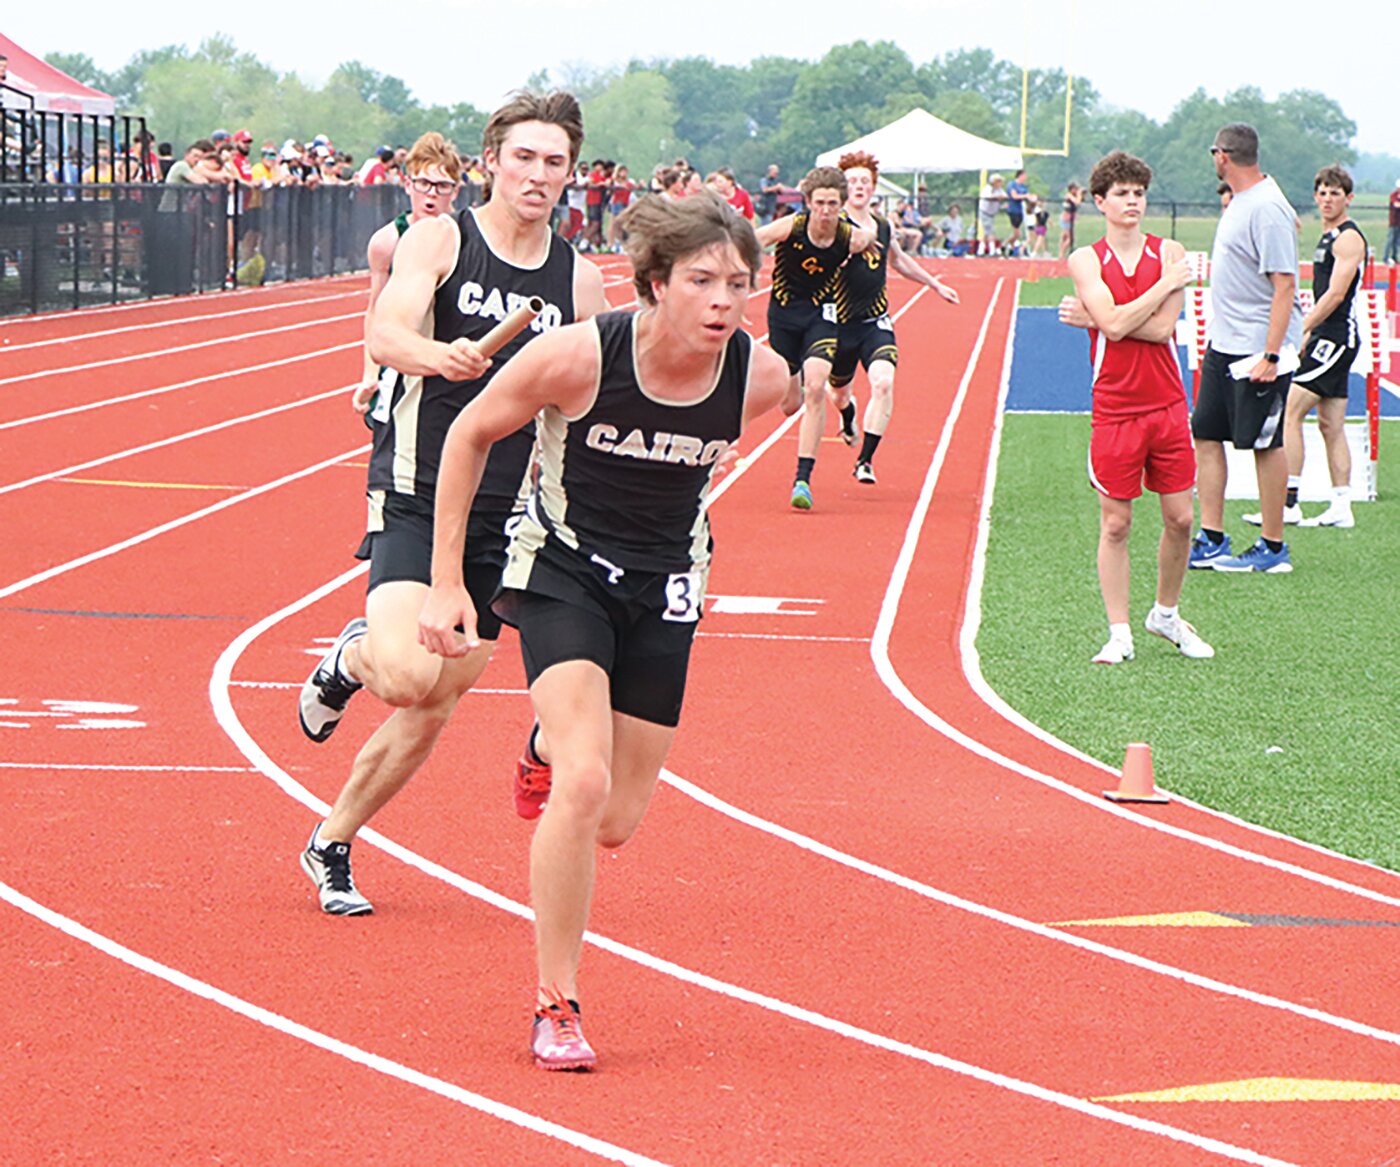 Cairo's Logan Head exchanges the baton to teammate Logan Hankins during the Class 1 sectional meet on Saturday, May 13.